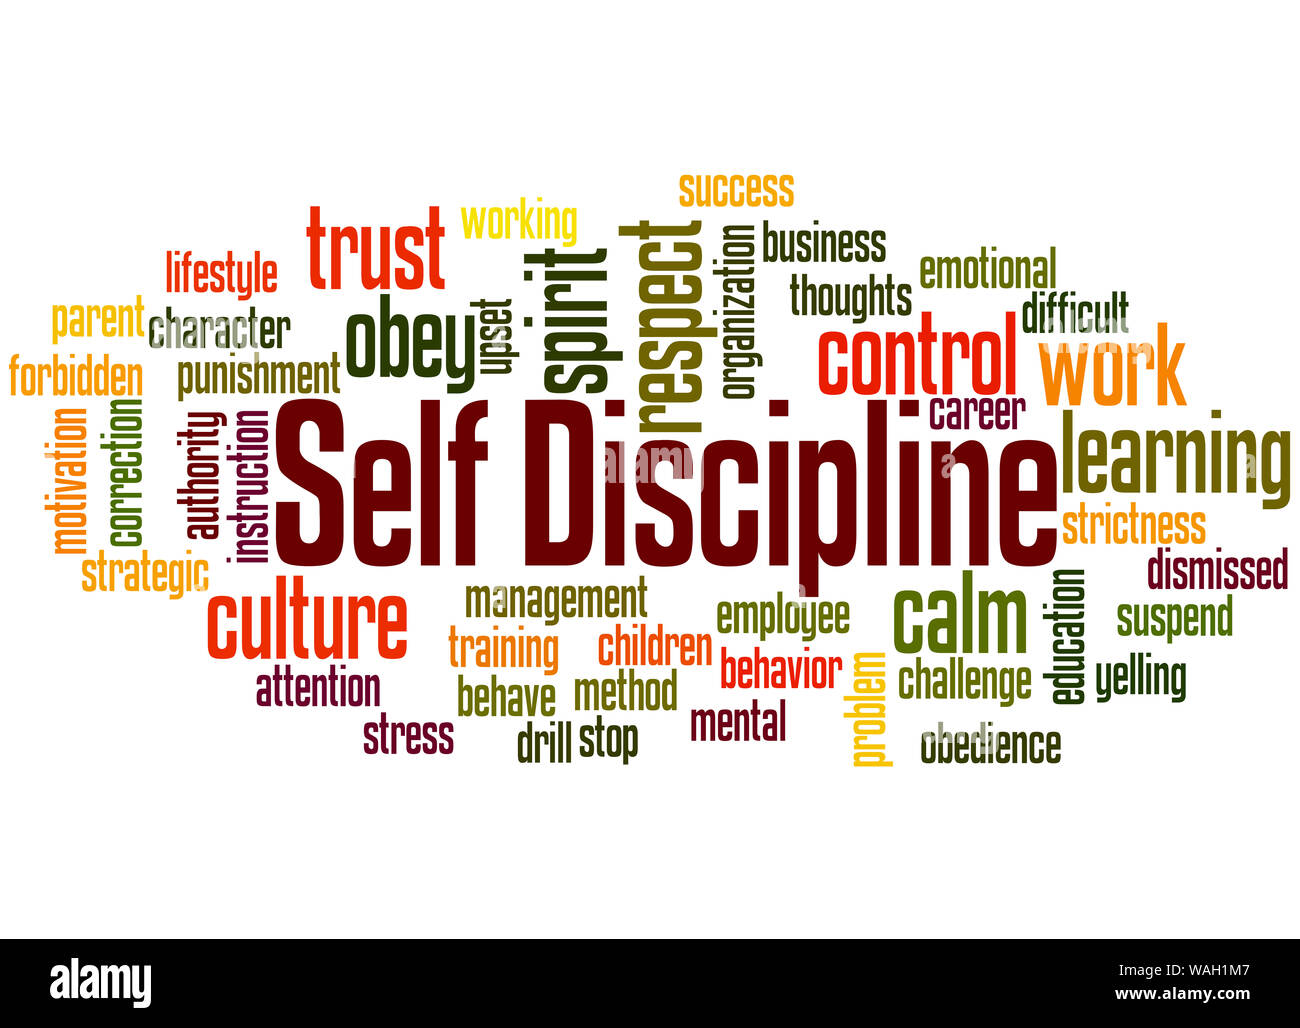 Self discipline word cloud concept on white background. Stock Photo